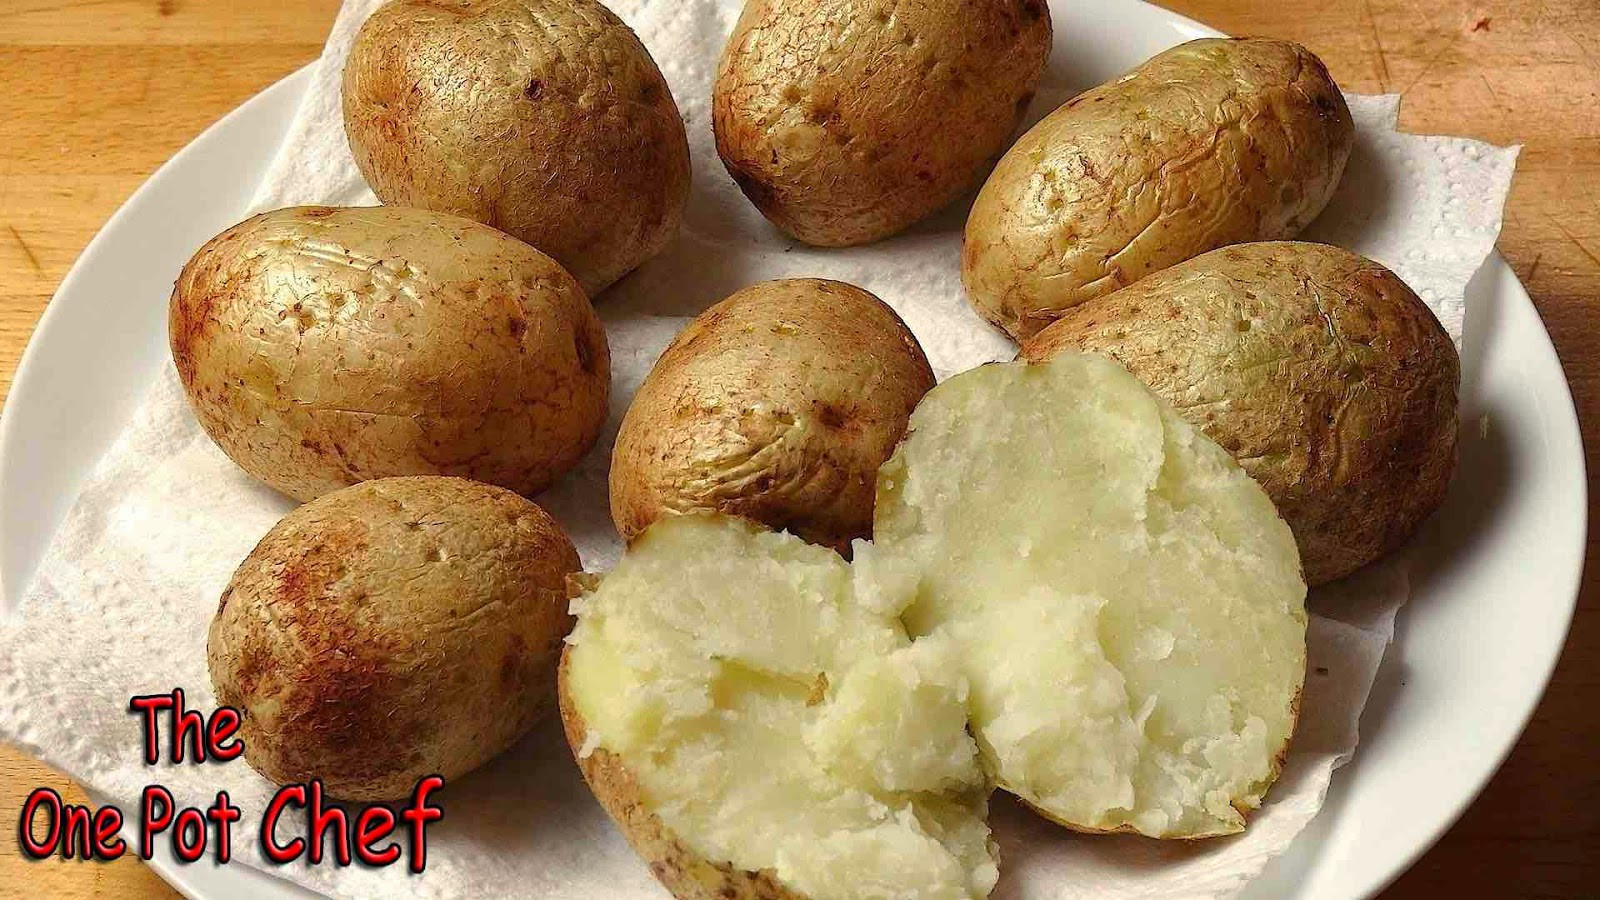 How To Make Baked Potato In Microwave
 The e Pot Chef Show Quick Tips Microwave Baked Potatoes